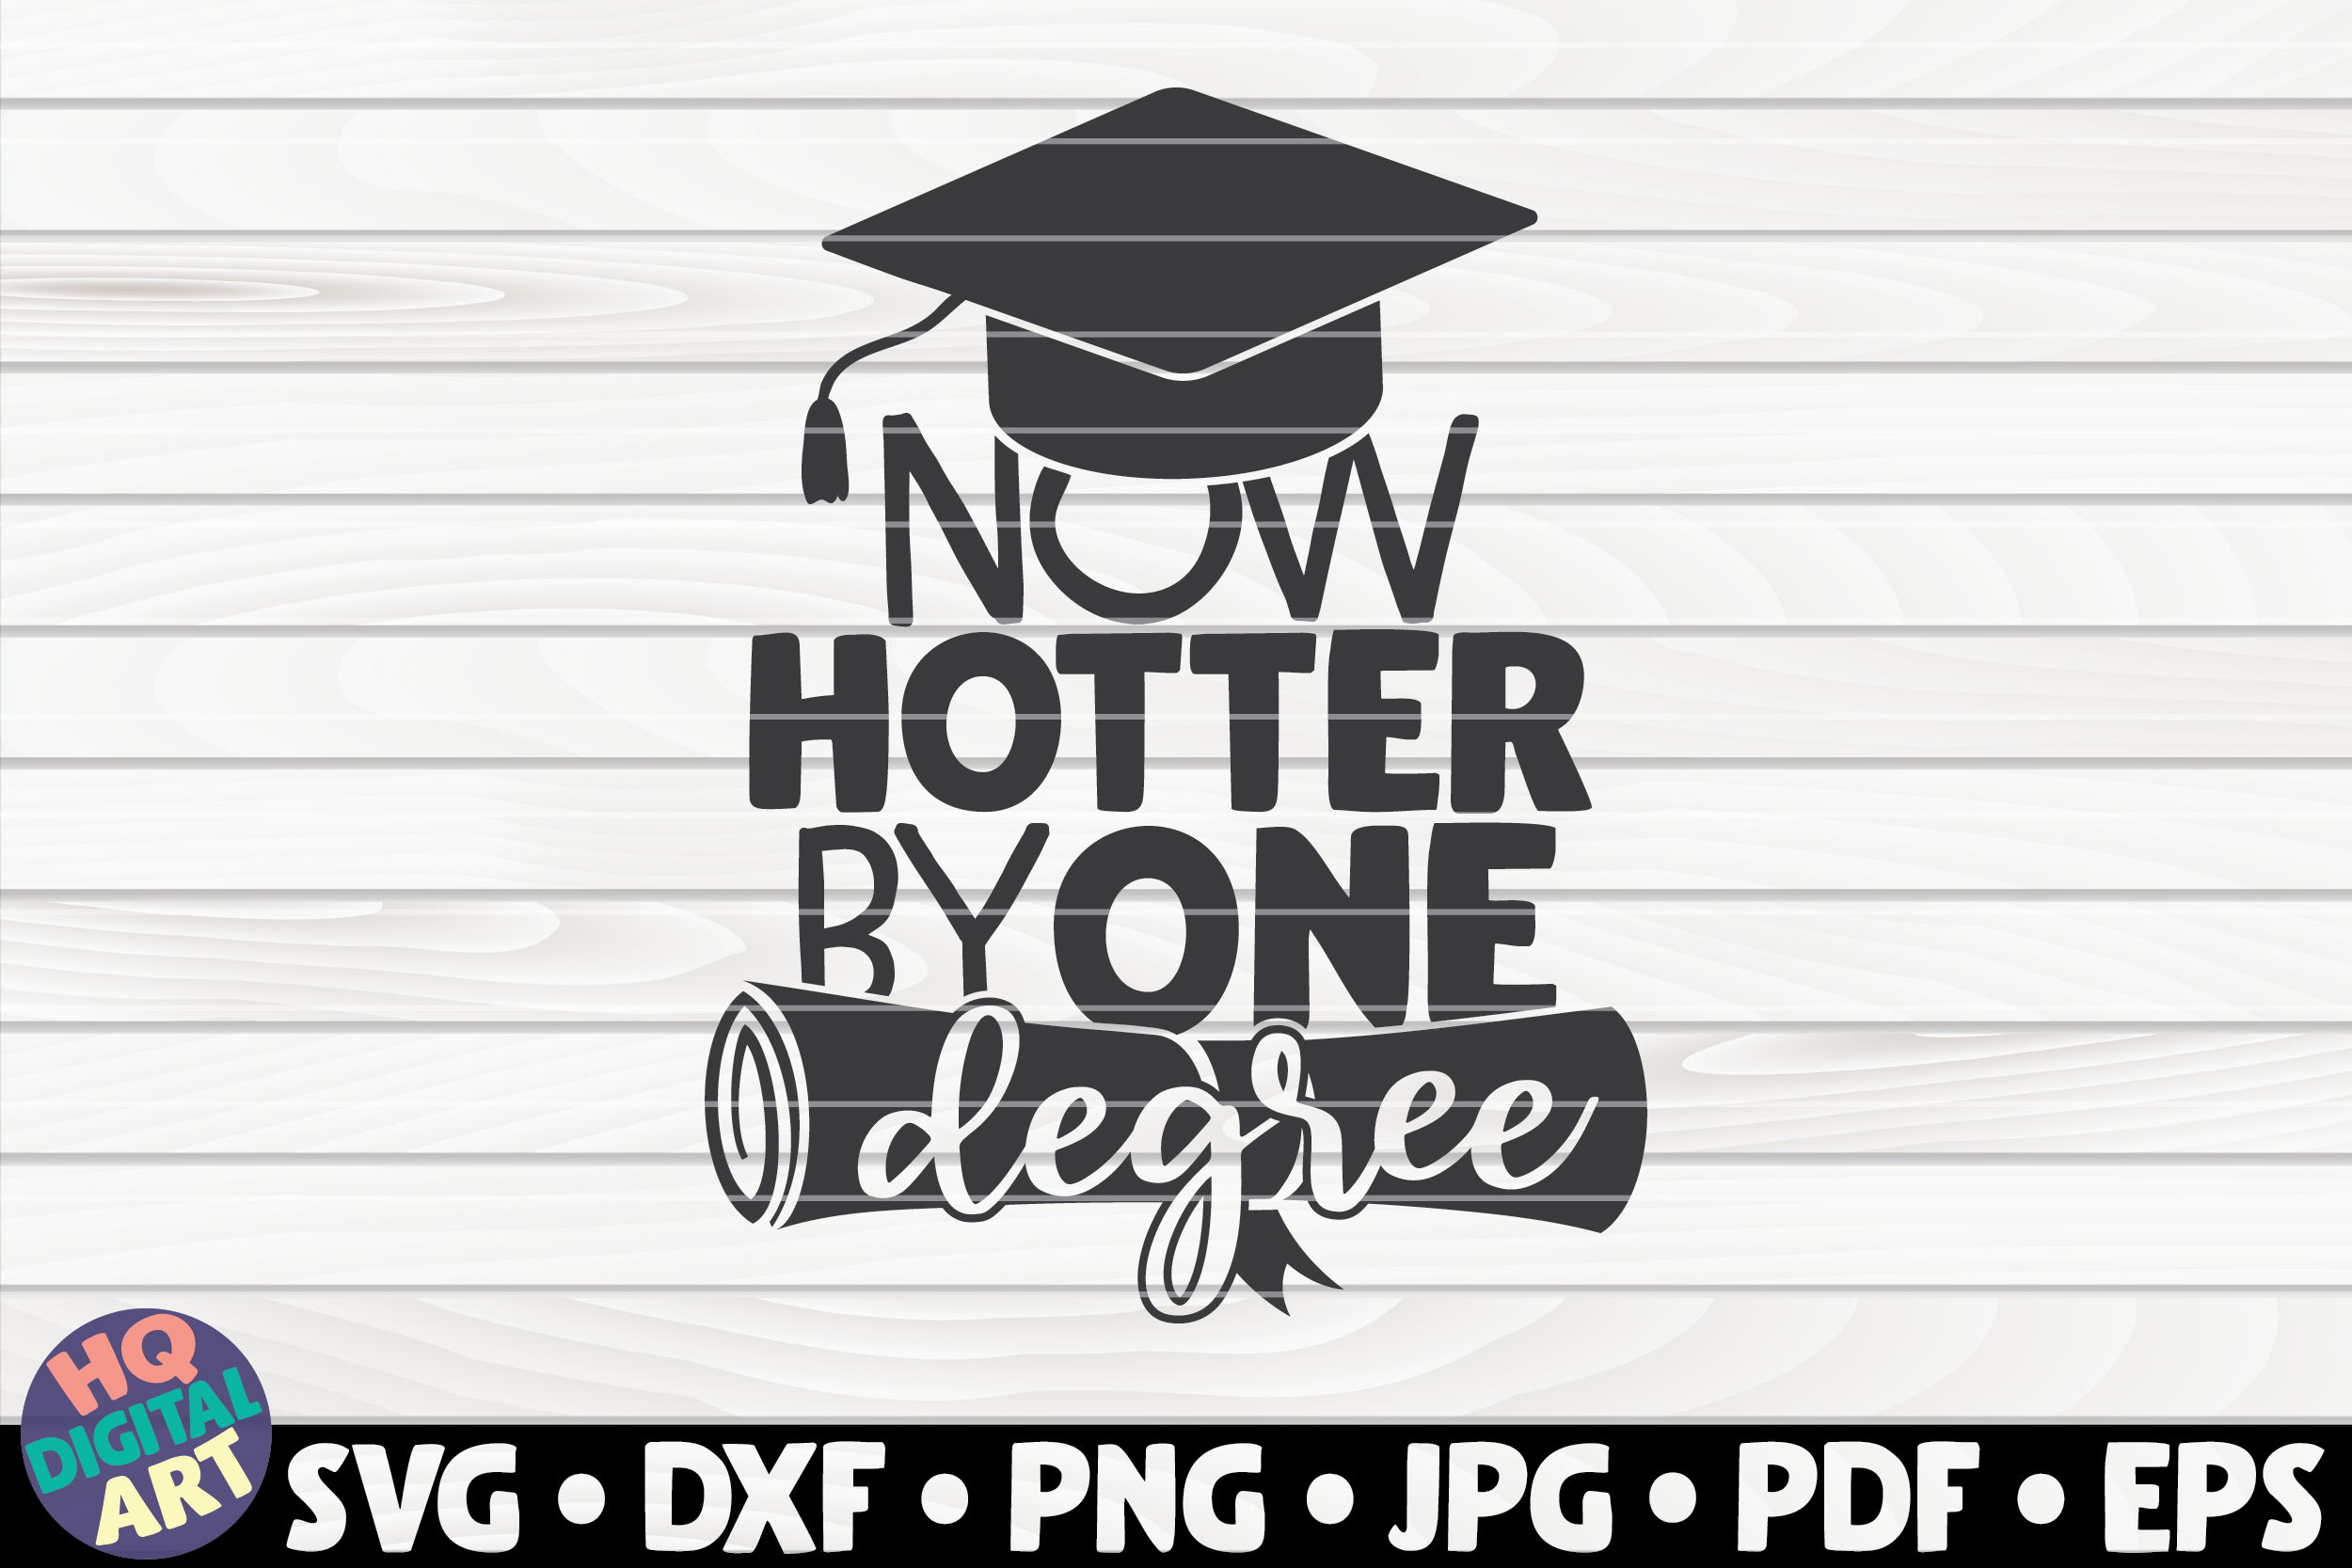 Now Hotter By One Degree Svg Graduation Quote By Hqdigitalart Thehungryjpeg Com